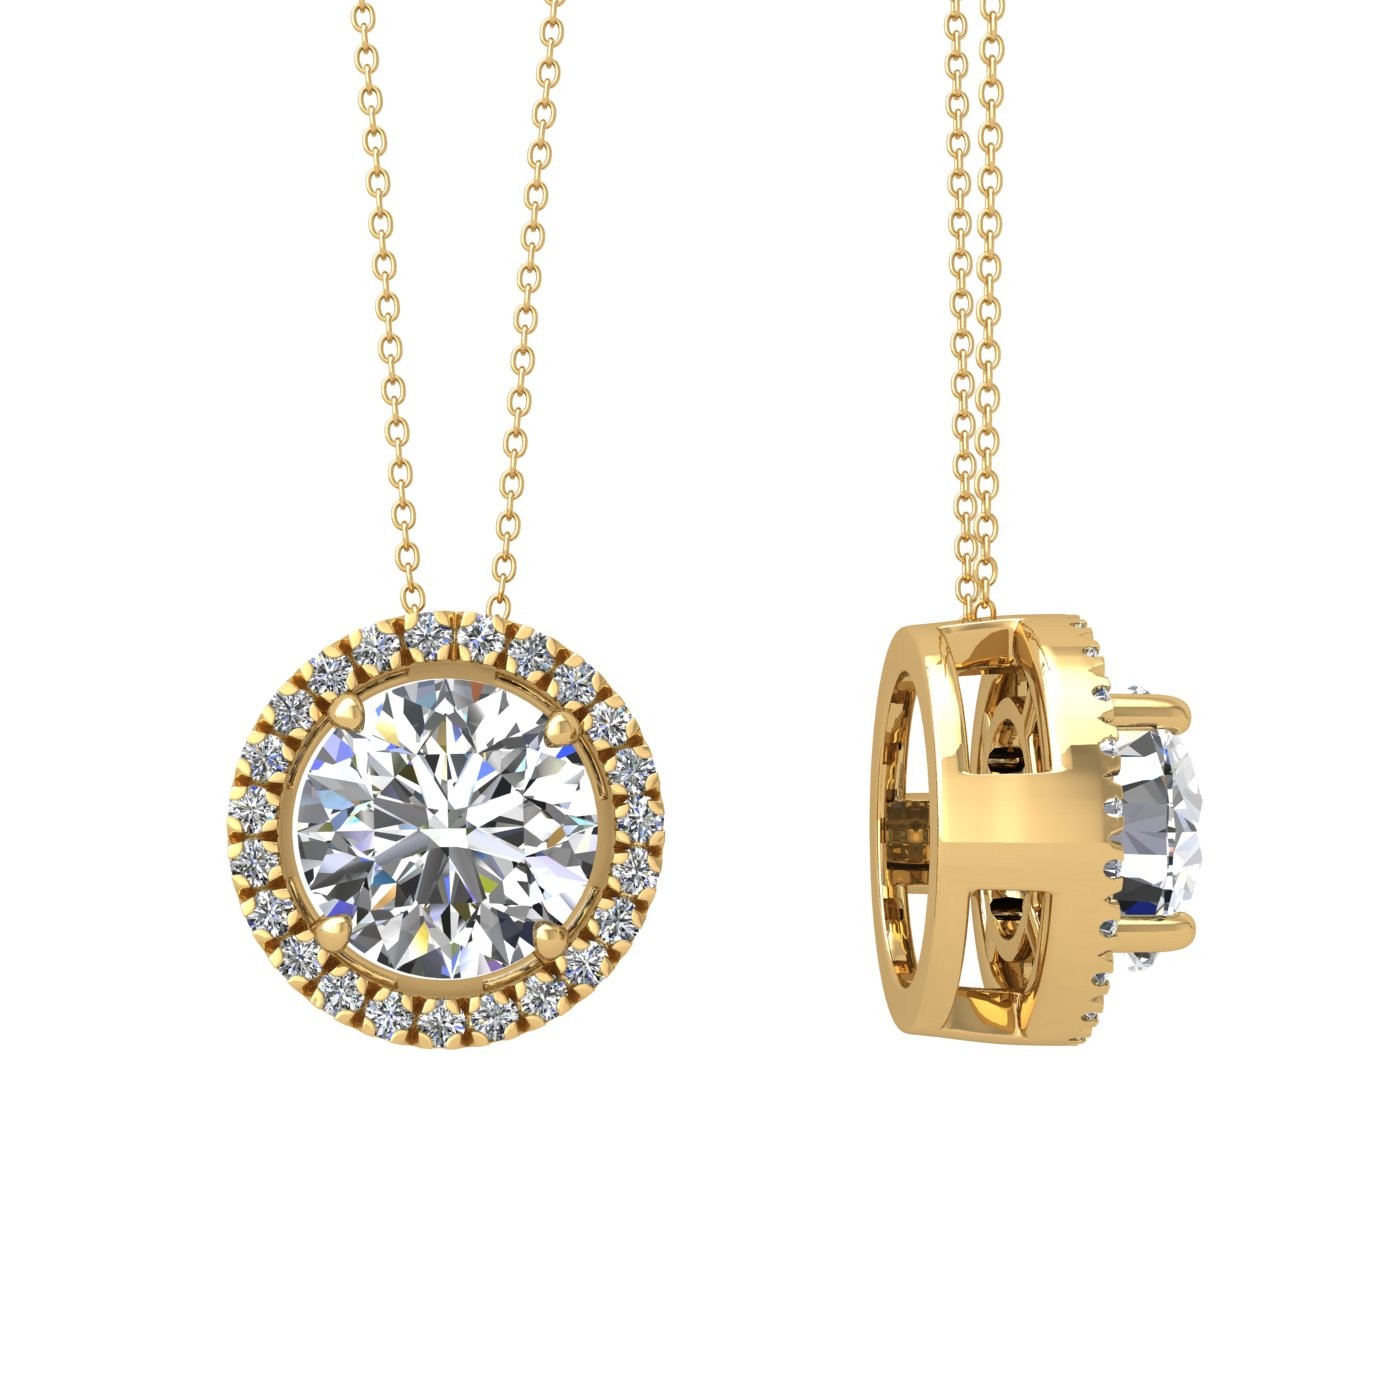 18k yellow gold 2 ct 4 prong round shape diamond pendant with diamond pavÉ set halo including chain seperate from the pendant Photos & images